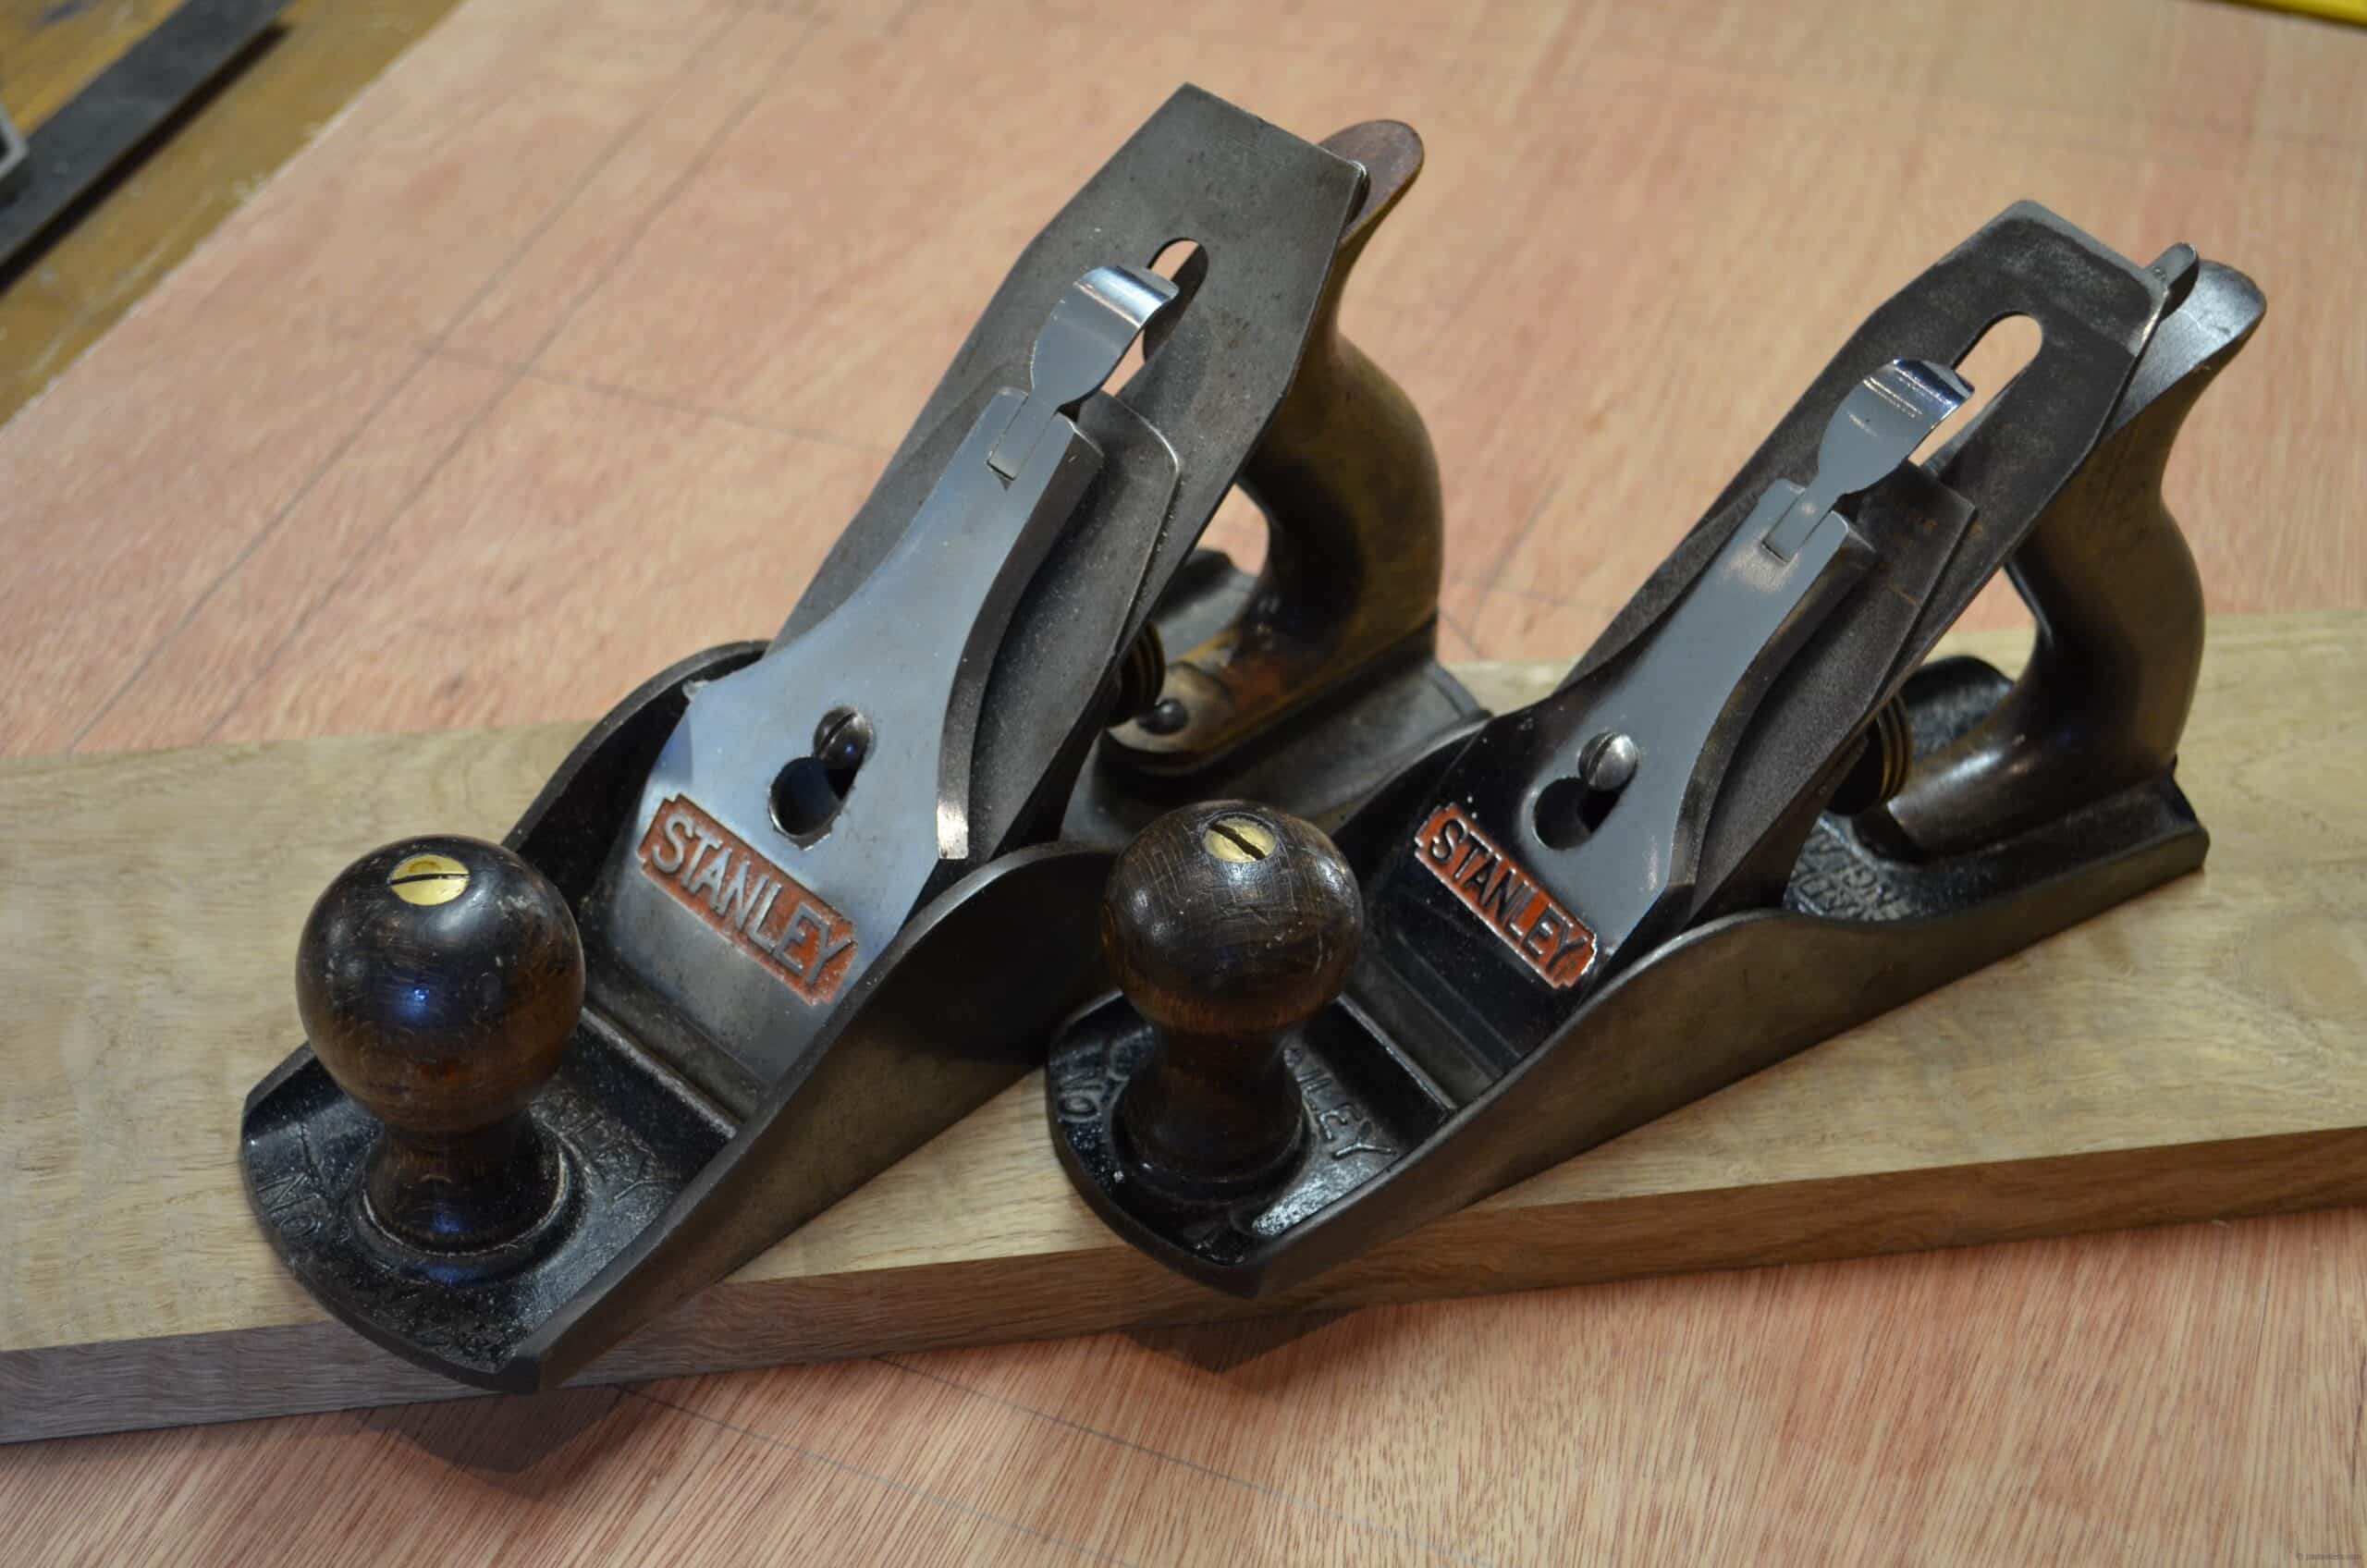 Buying good tools cheap - smoothing planes - Paul Sellers ...